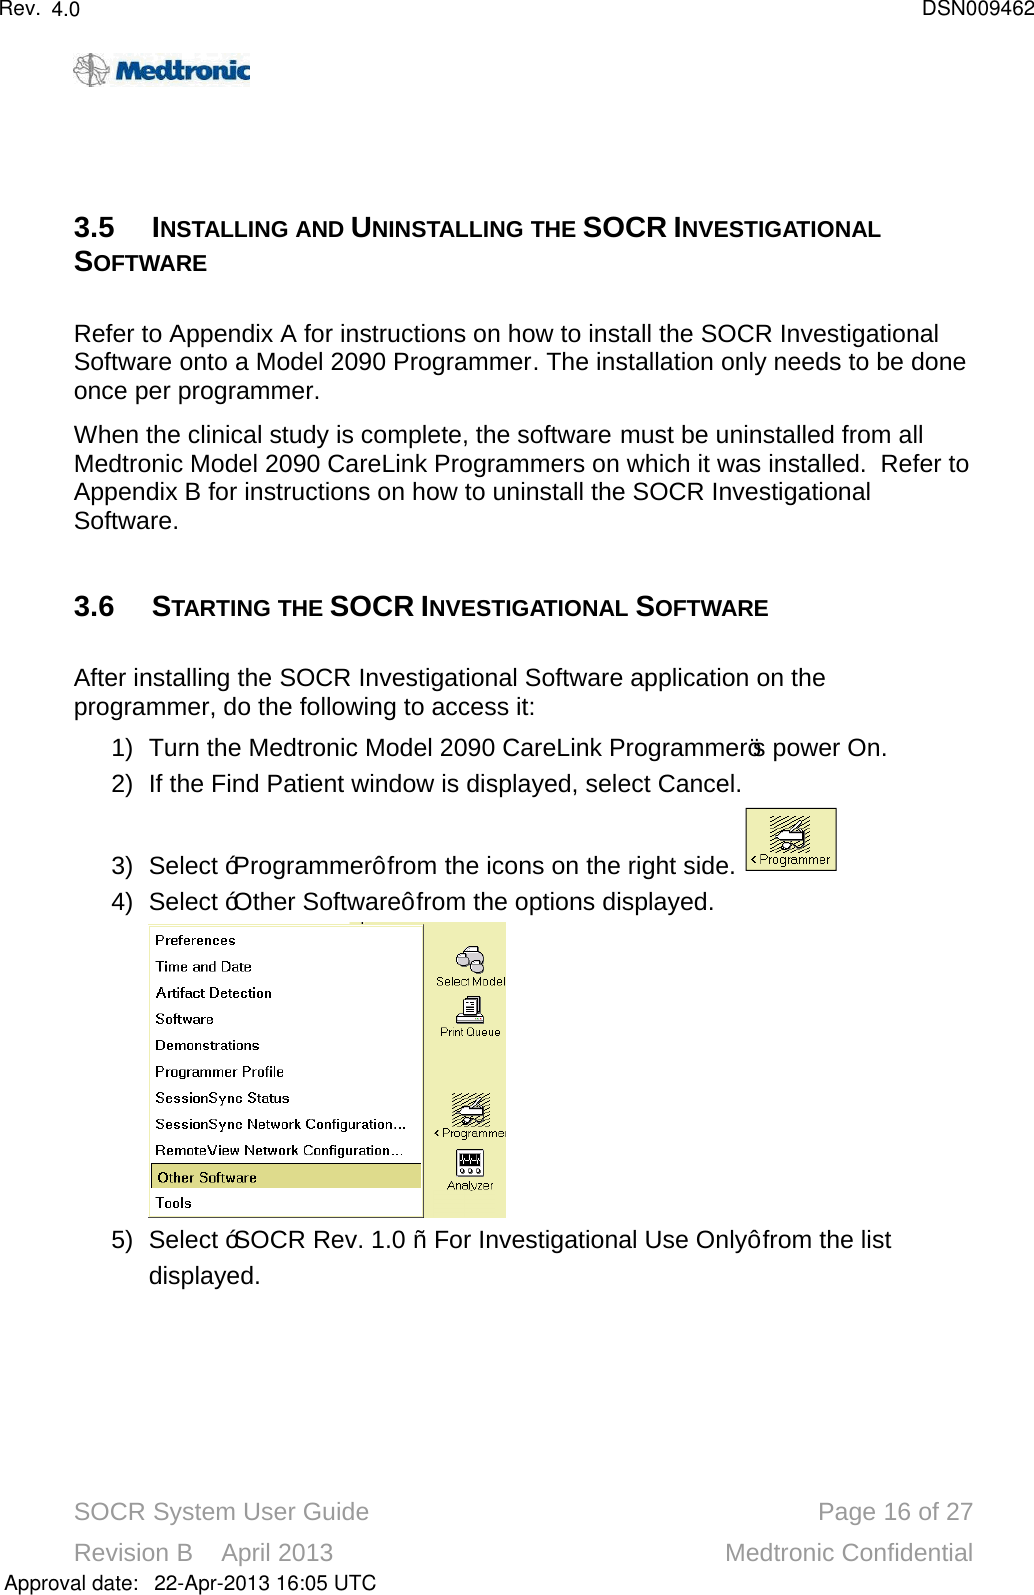 SOCR System User Guide Page 16 of 27Revision B    April 2013 Medtronic Confidential3.5 INSTALLING AND UNINSTALLING THE SOCR INVESTIGATIONAL SOFTWARE Refer to Appendix A for instructions on how to install the SOCR Investigational Software onto a Model 2090 Programmer. The installation only needs to be done once per programmer.When the clinical study is complete, the software must be uninstalled from all Medtronic Model 2090 CareLink Programmers on which it was installed.  Refer to Appendix B for instructions on how to uninstall the SOCR Investigational Software.3.6 STARTING THE SOCR INVESTIGATIONAL SOFTWAREAfter installing the SOCR Investigational Software application on the programmer, do the following to access it:1) Turn the Medtronic Model 2090 CareLink Programmer’s power On.2) If the Find Patient window is displayed, select Cancel.3) Select “Programmer” from the icons on the right side. 4) Select “Other Software” from the options displayed.  5) Select “SOCR Rev. 1.0 –For Investigational Use Only” from the list displayed.Approval date:4.0 DSN00946222-Apr-2013 16:05 UTCRev.